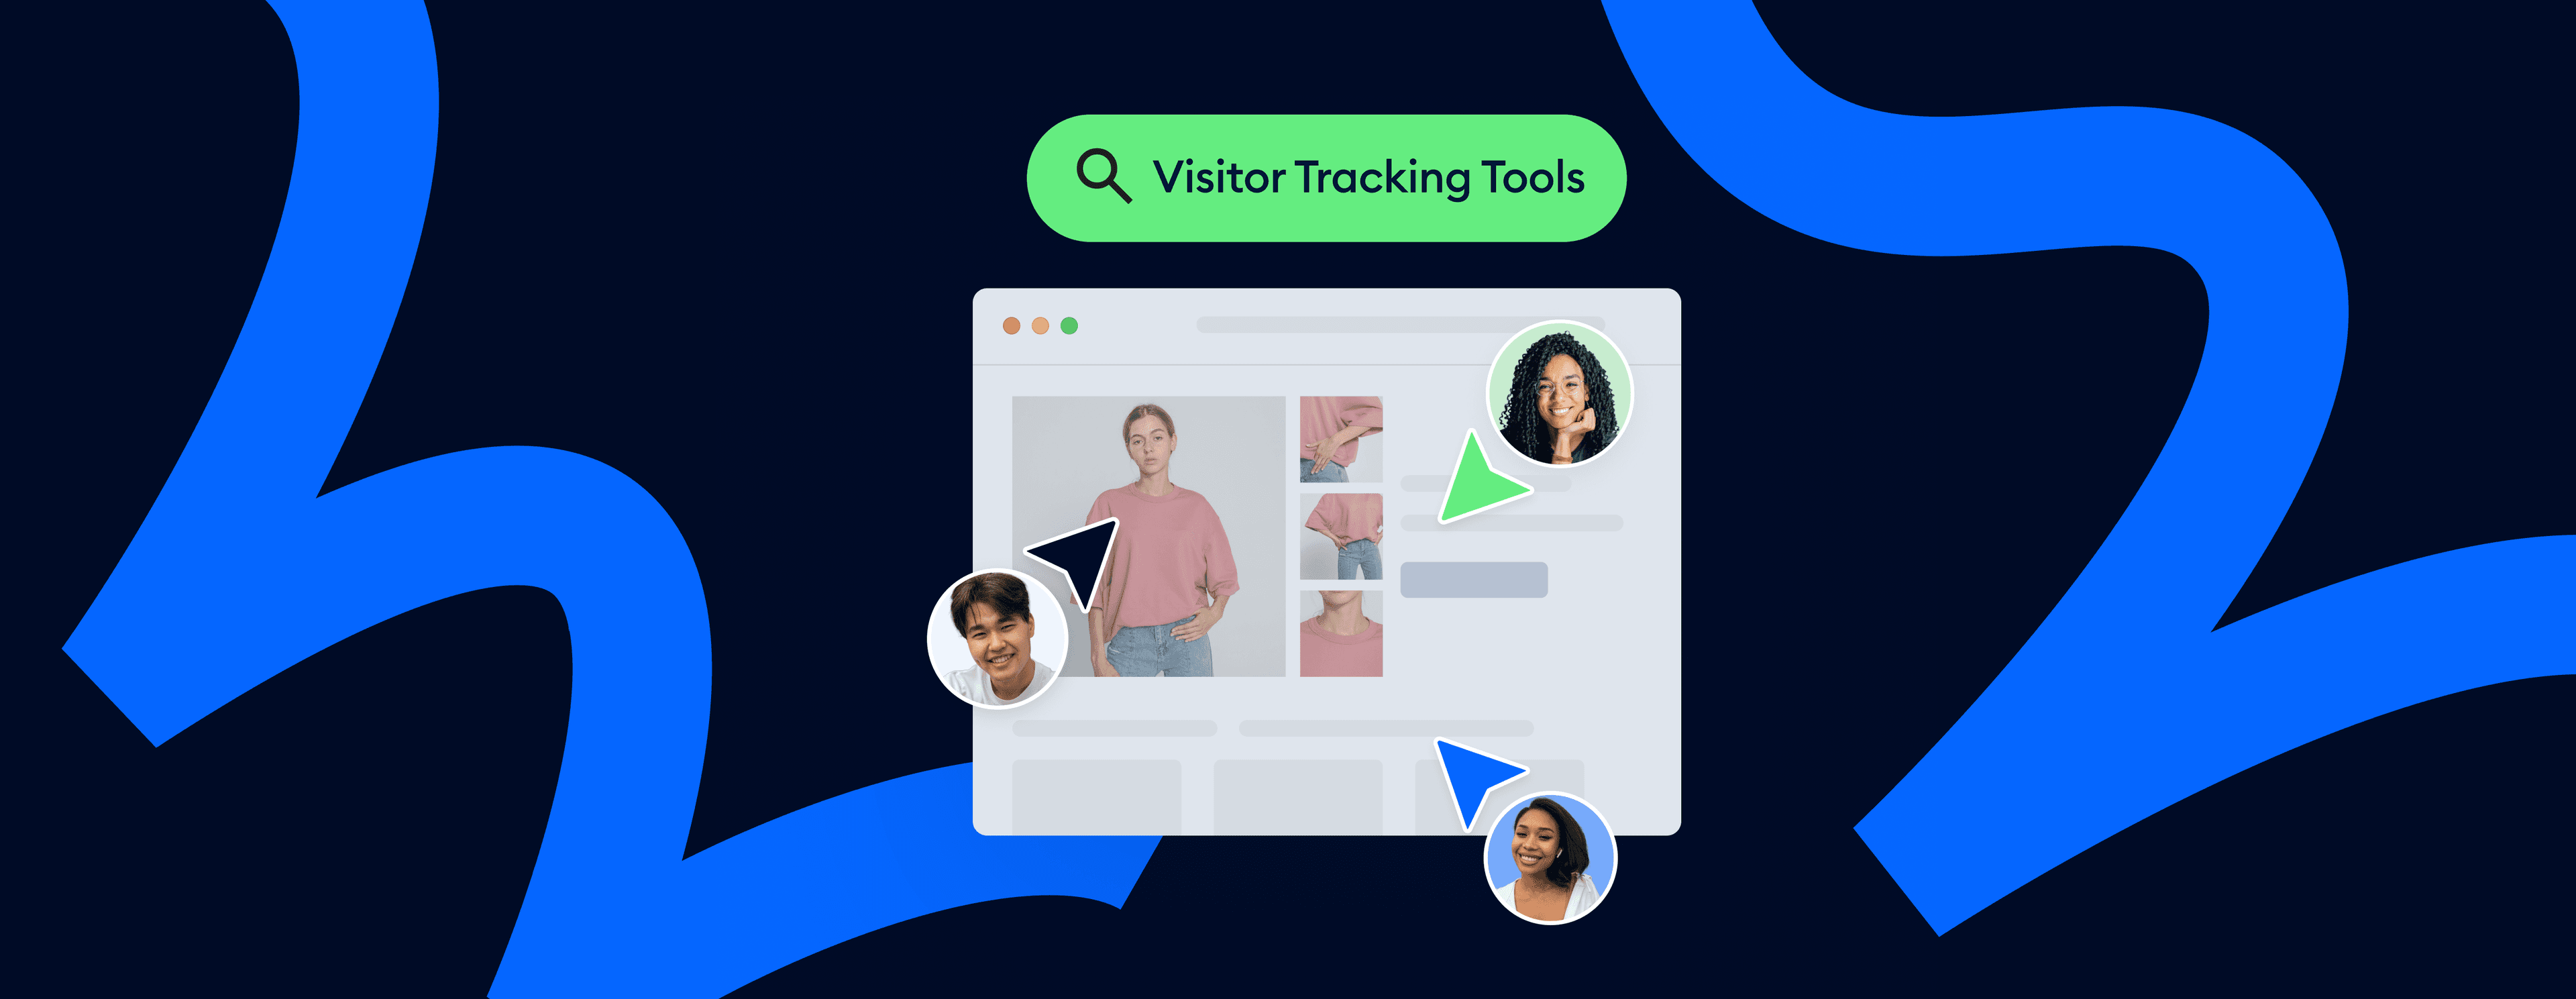 Website Visitor Tracking Tools cover image